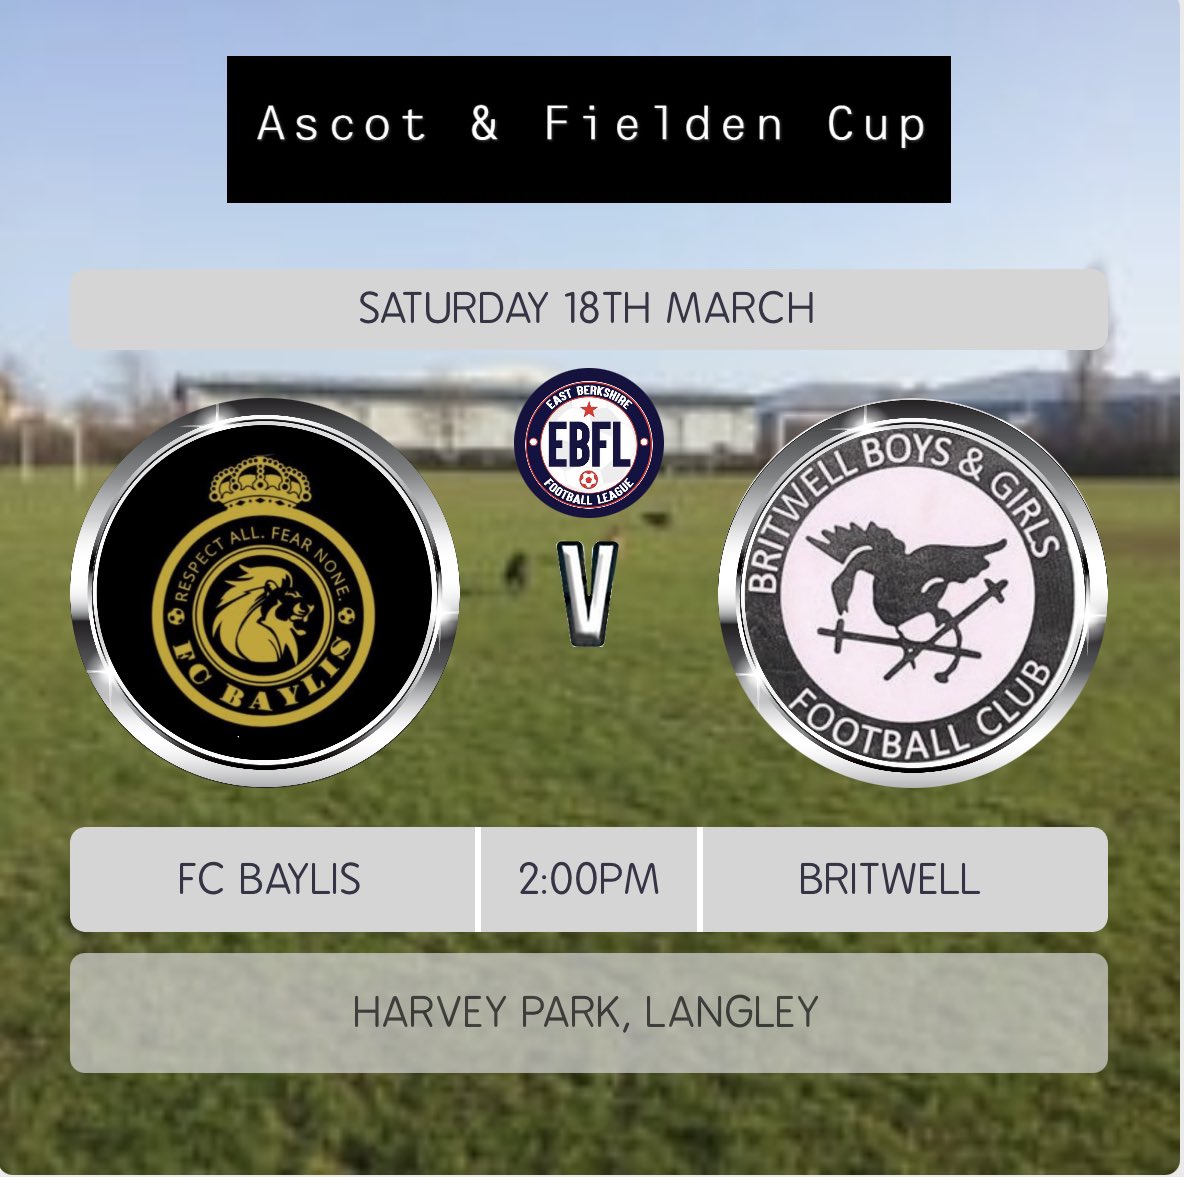 This Saturday there’s only one SHOWCASE GAME #TheTrilogy 

A&F cup QTR Final 

@fcbaylis @toner_aaron @fiberkshire @StevenBushboy @darthscrote @GaryHousePhoto